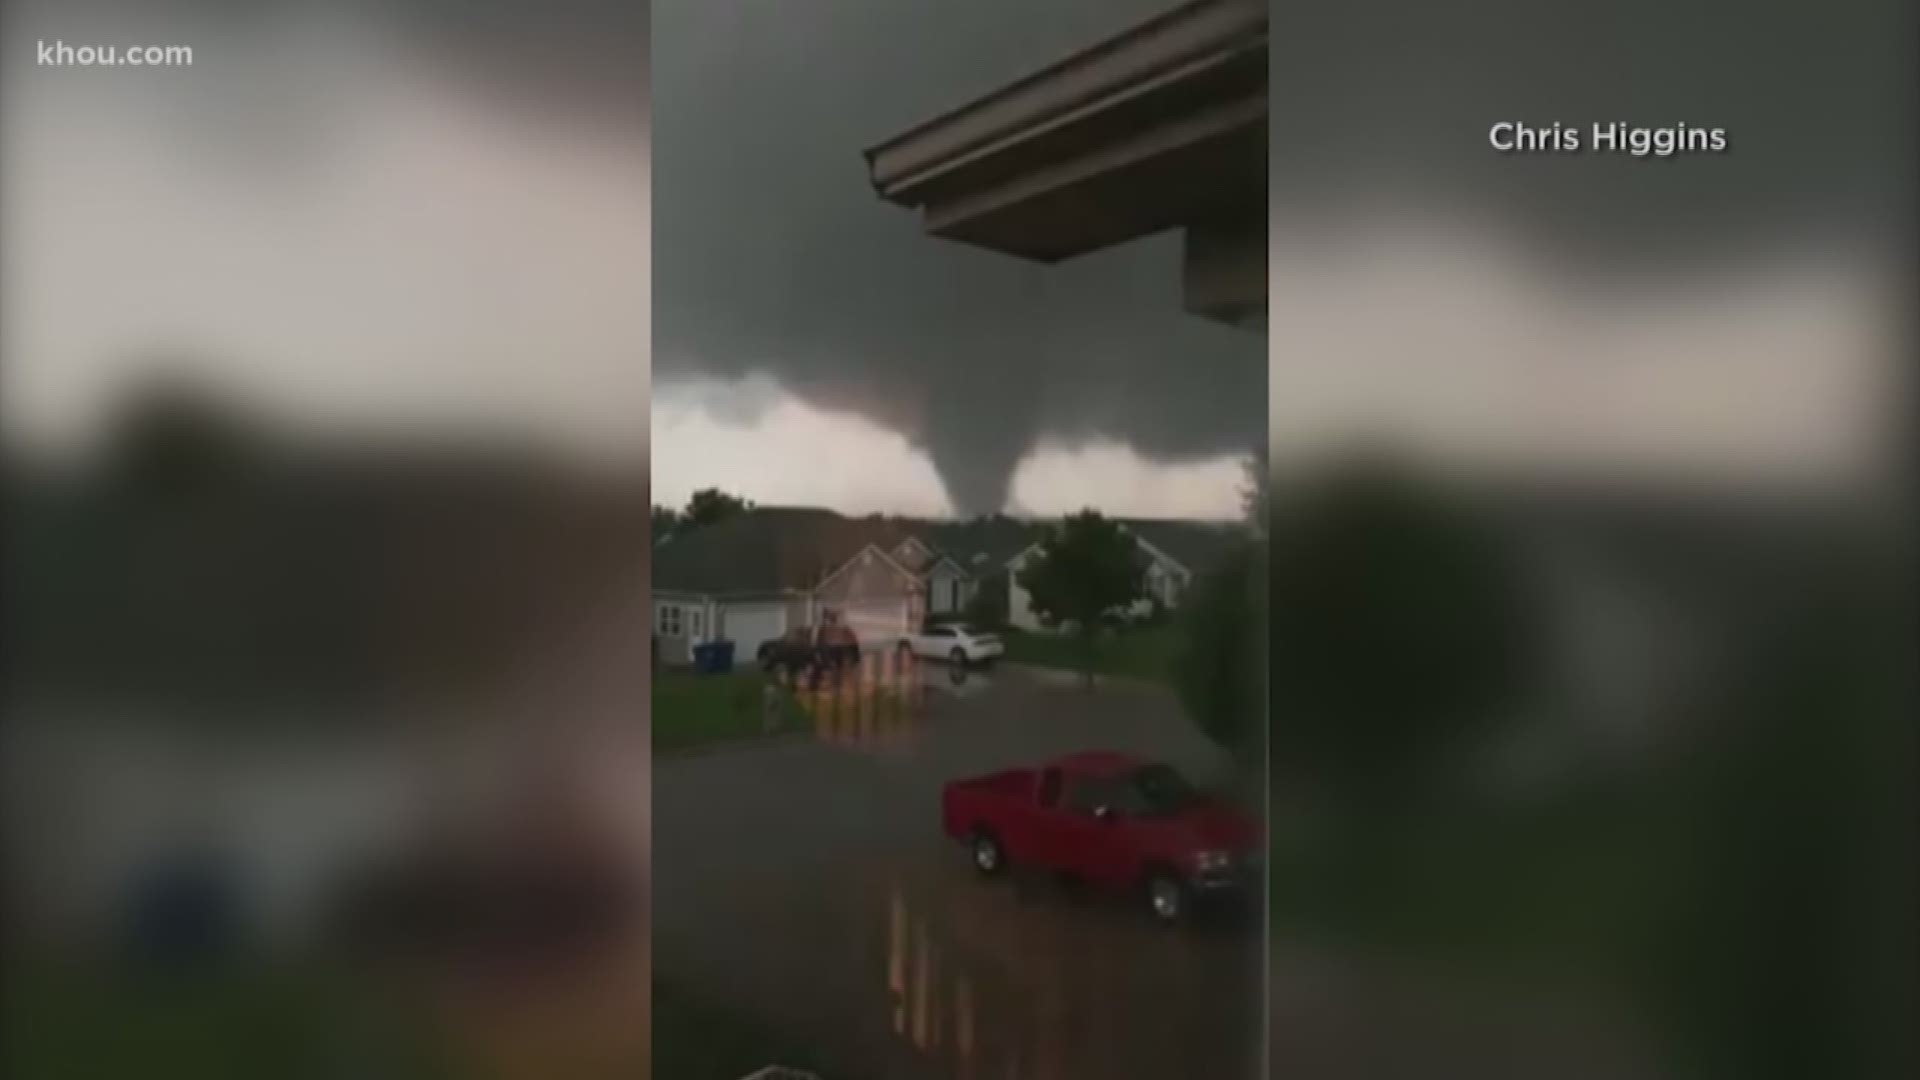 Three people were killed in a tornado near Joplin and the National Weather Service reported a "violent tornado" in Jefferson City late Wednesday night.